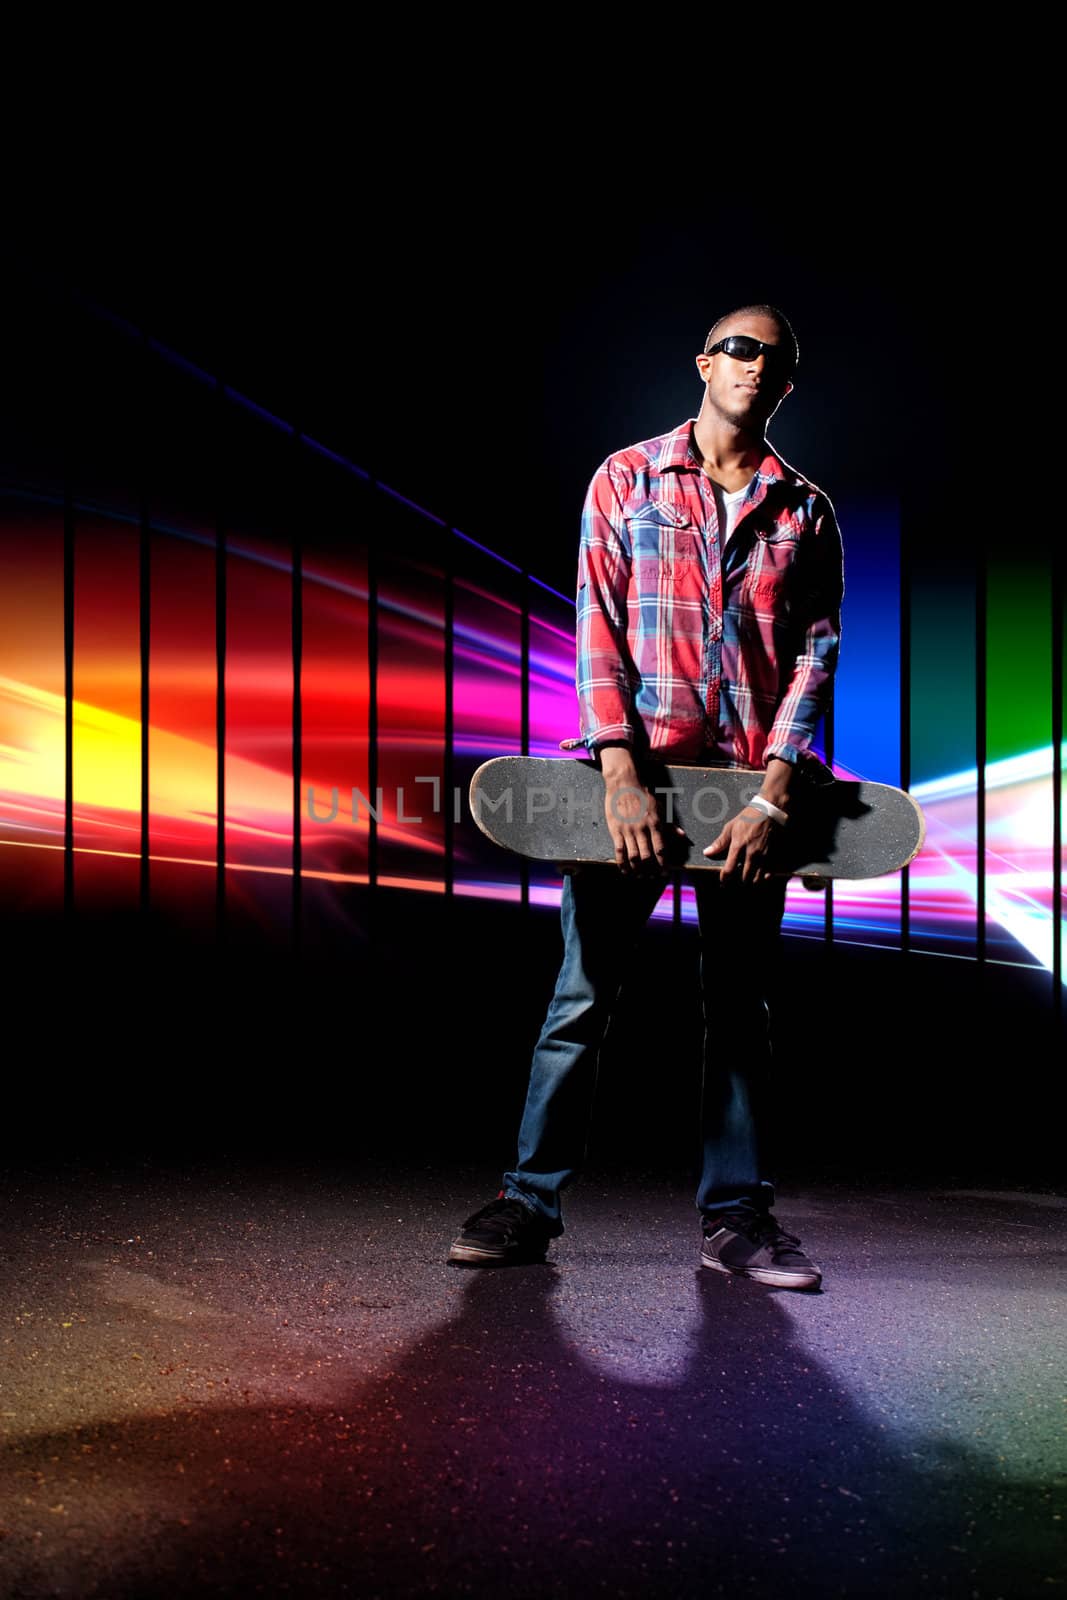 An African American skateboarder  holding his skateboard deck under dramatic lighting with a creative rainbow color schemed glowing spectrum in the background.